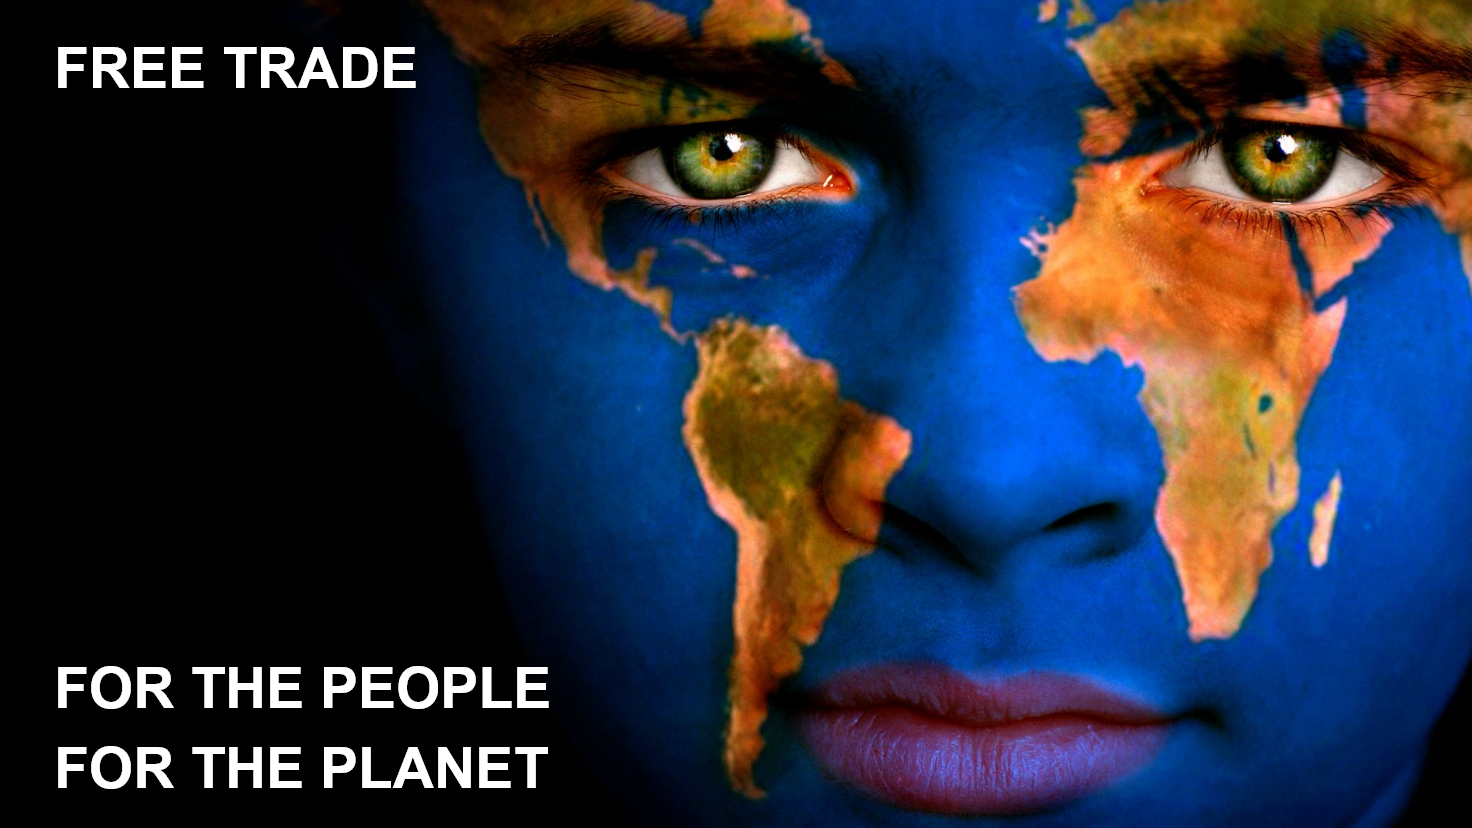 Free Trade, for the people, for the planet.